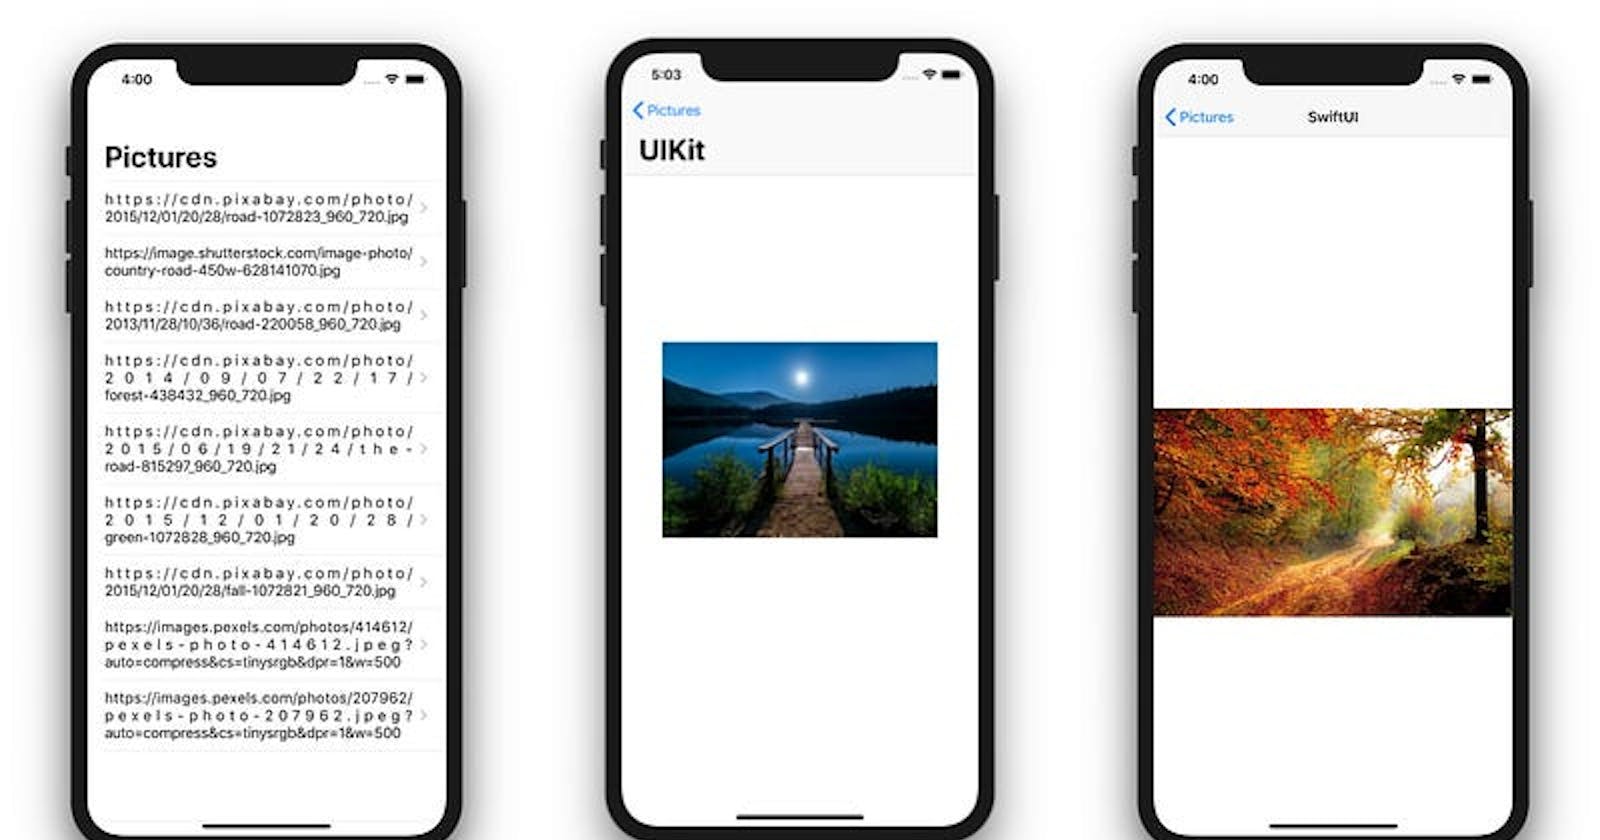 Integrating SwiftUI with UIKit and Developing Xcode Previews for UIKit’s ViewController